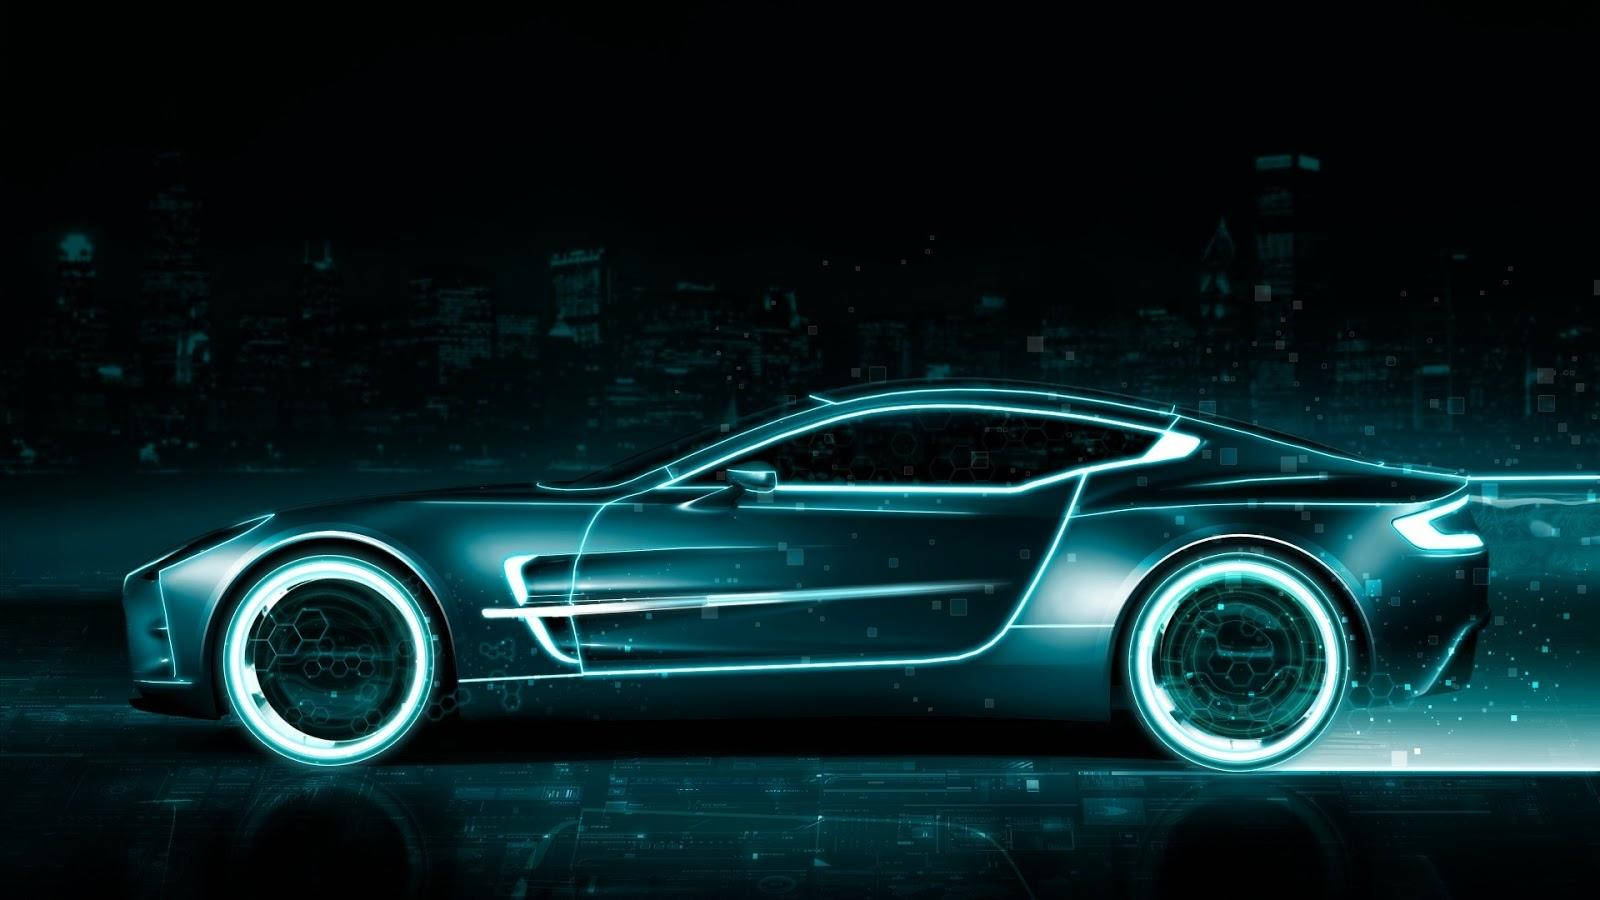 A Futuristic Car With A Neon Light On It Background